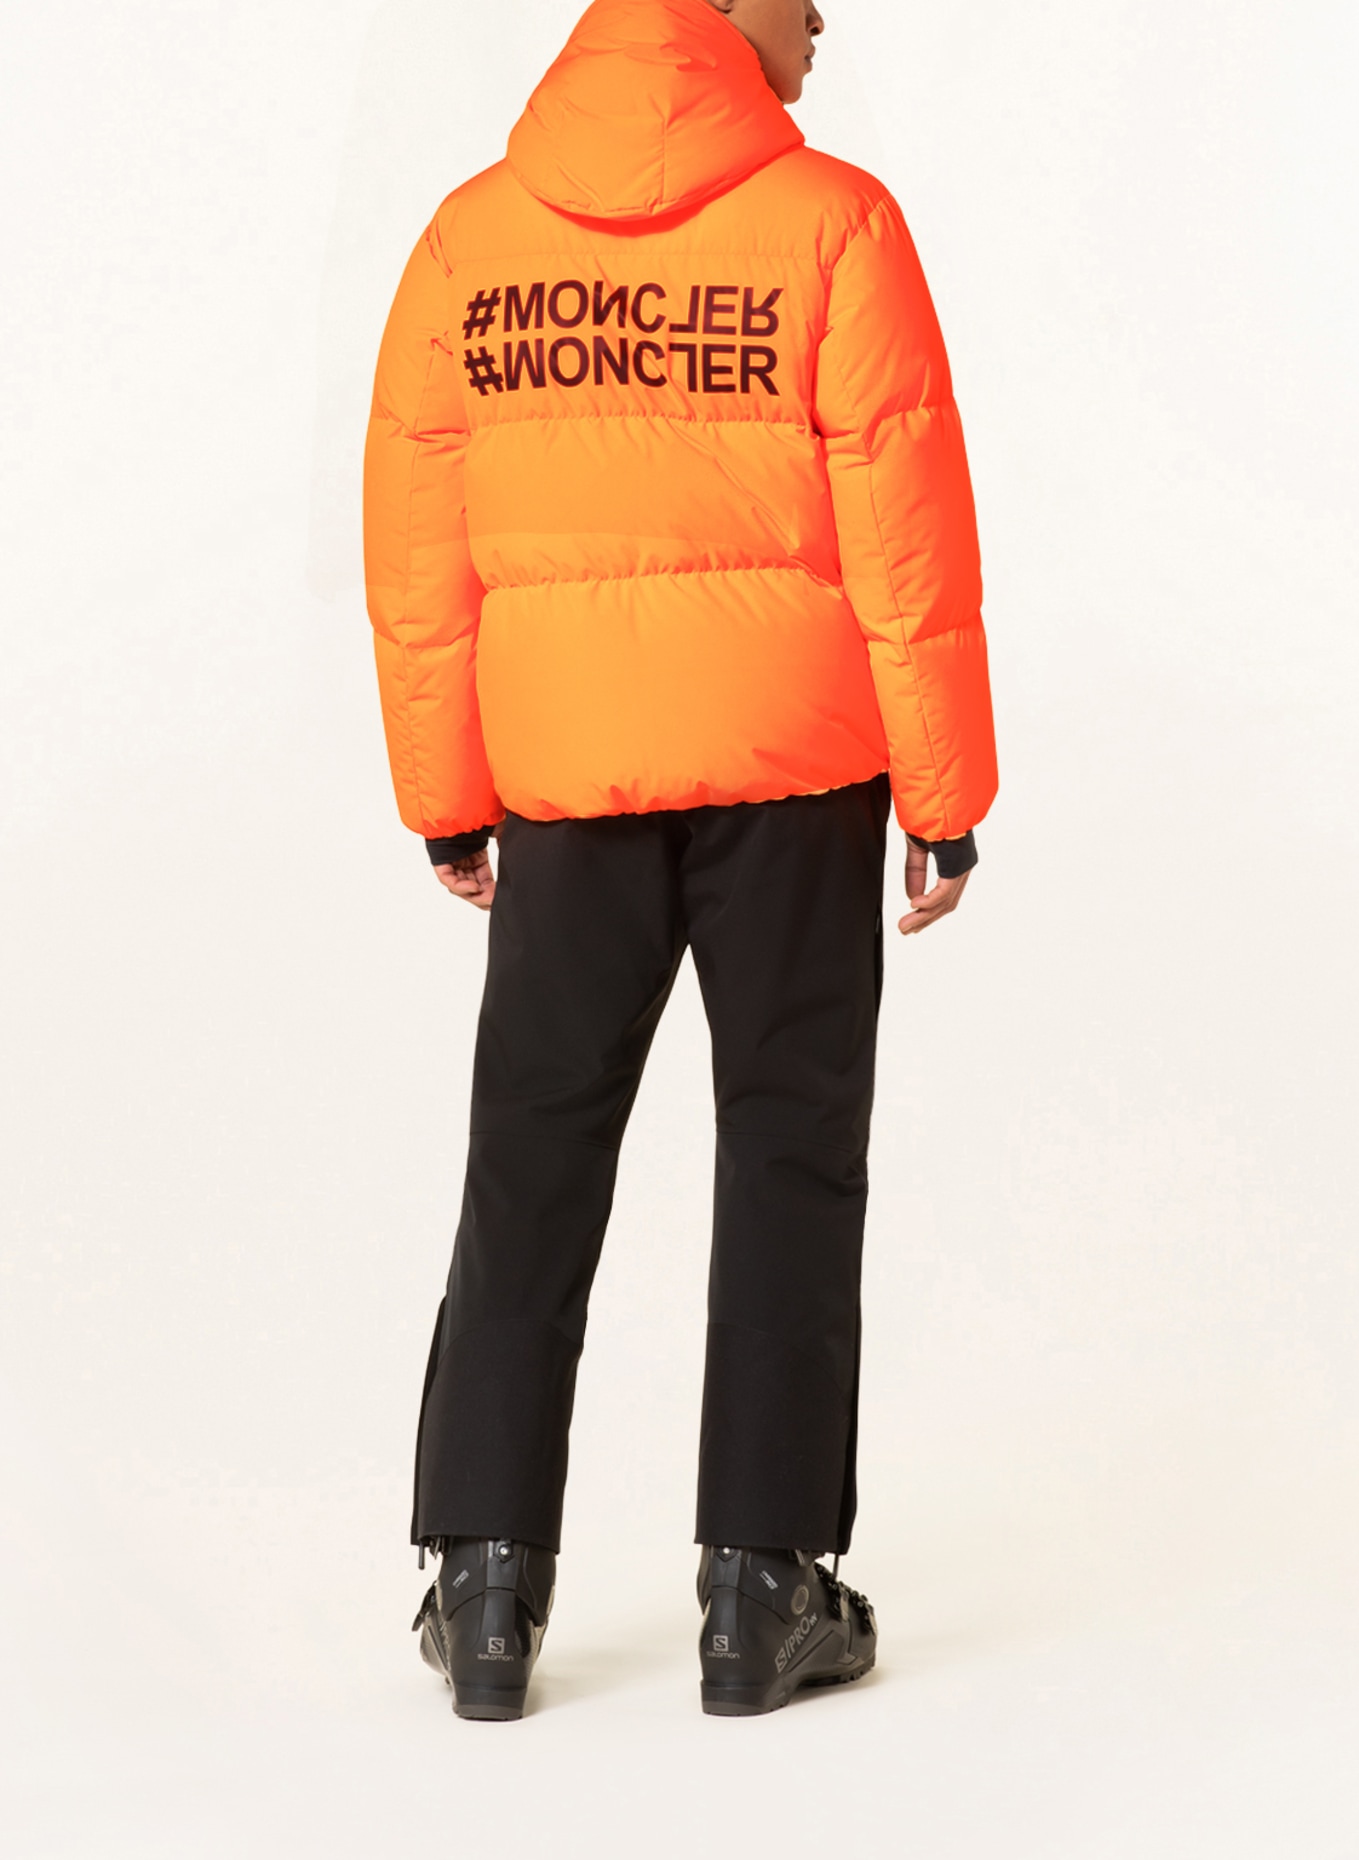 All You Need To Know About The Moncler Mazod Jacket